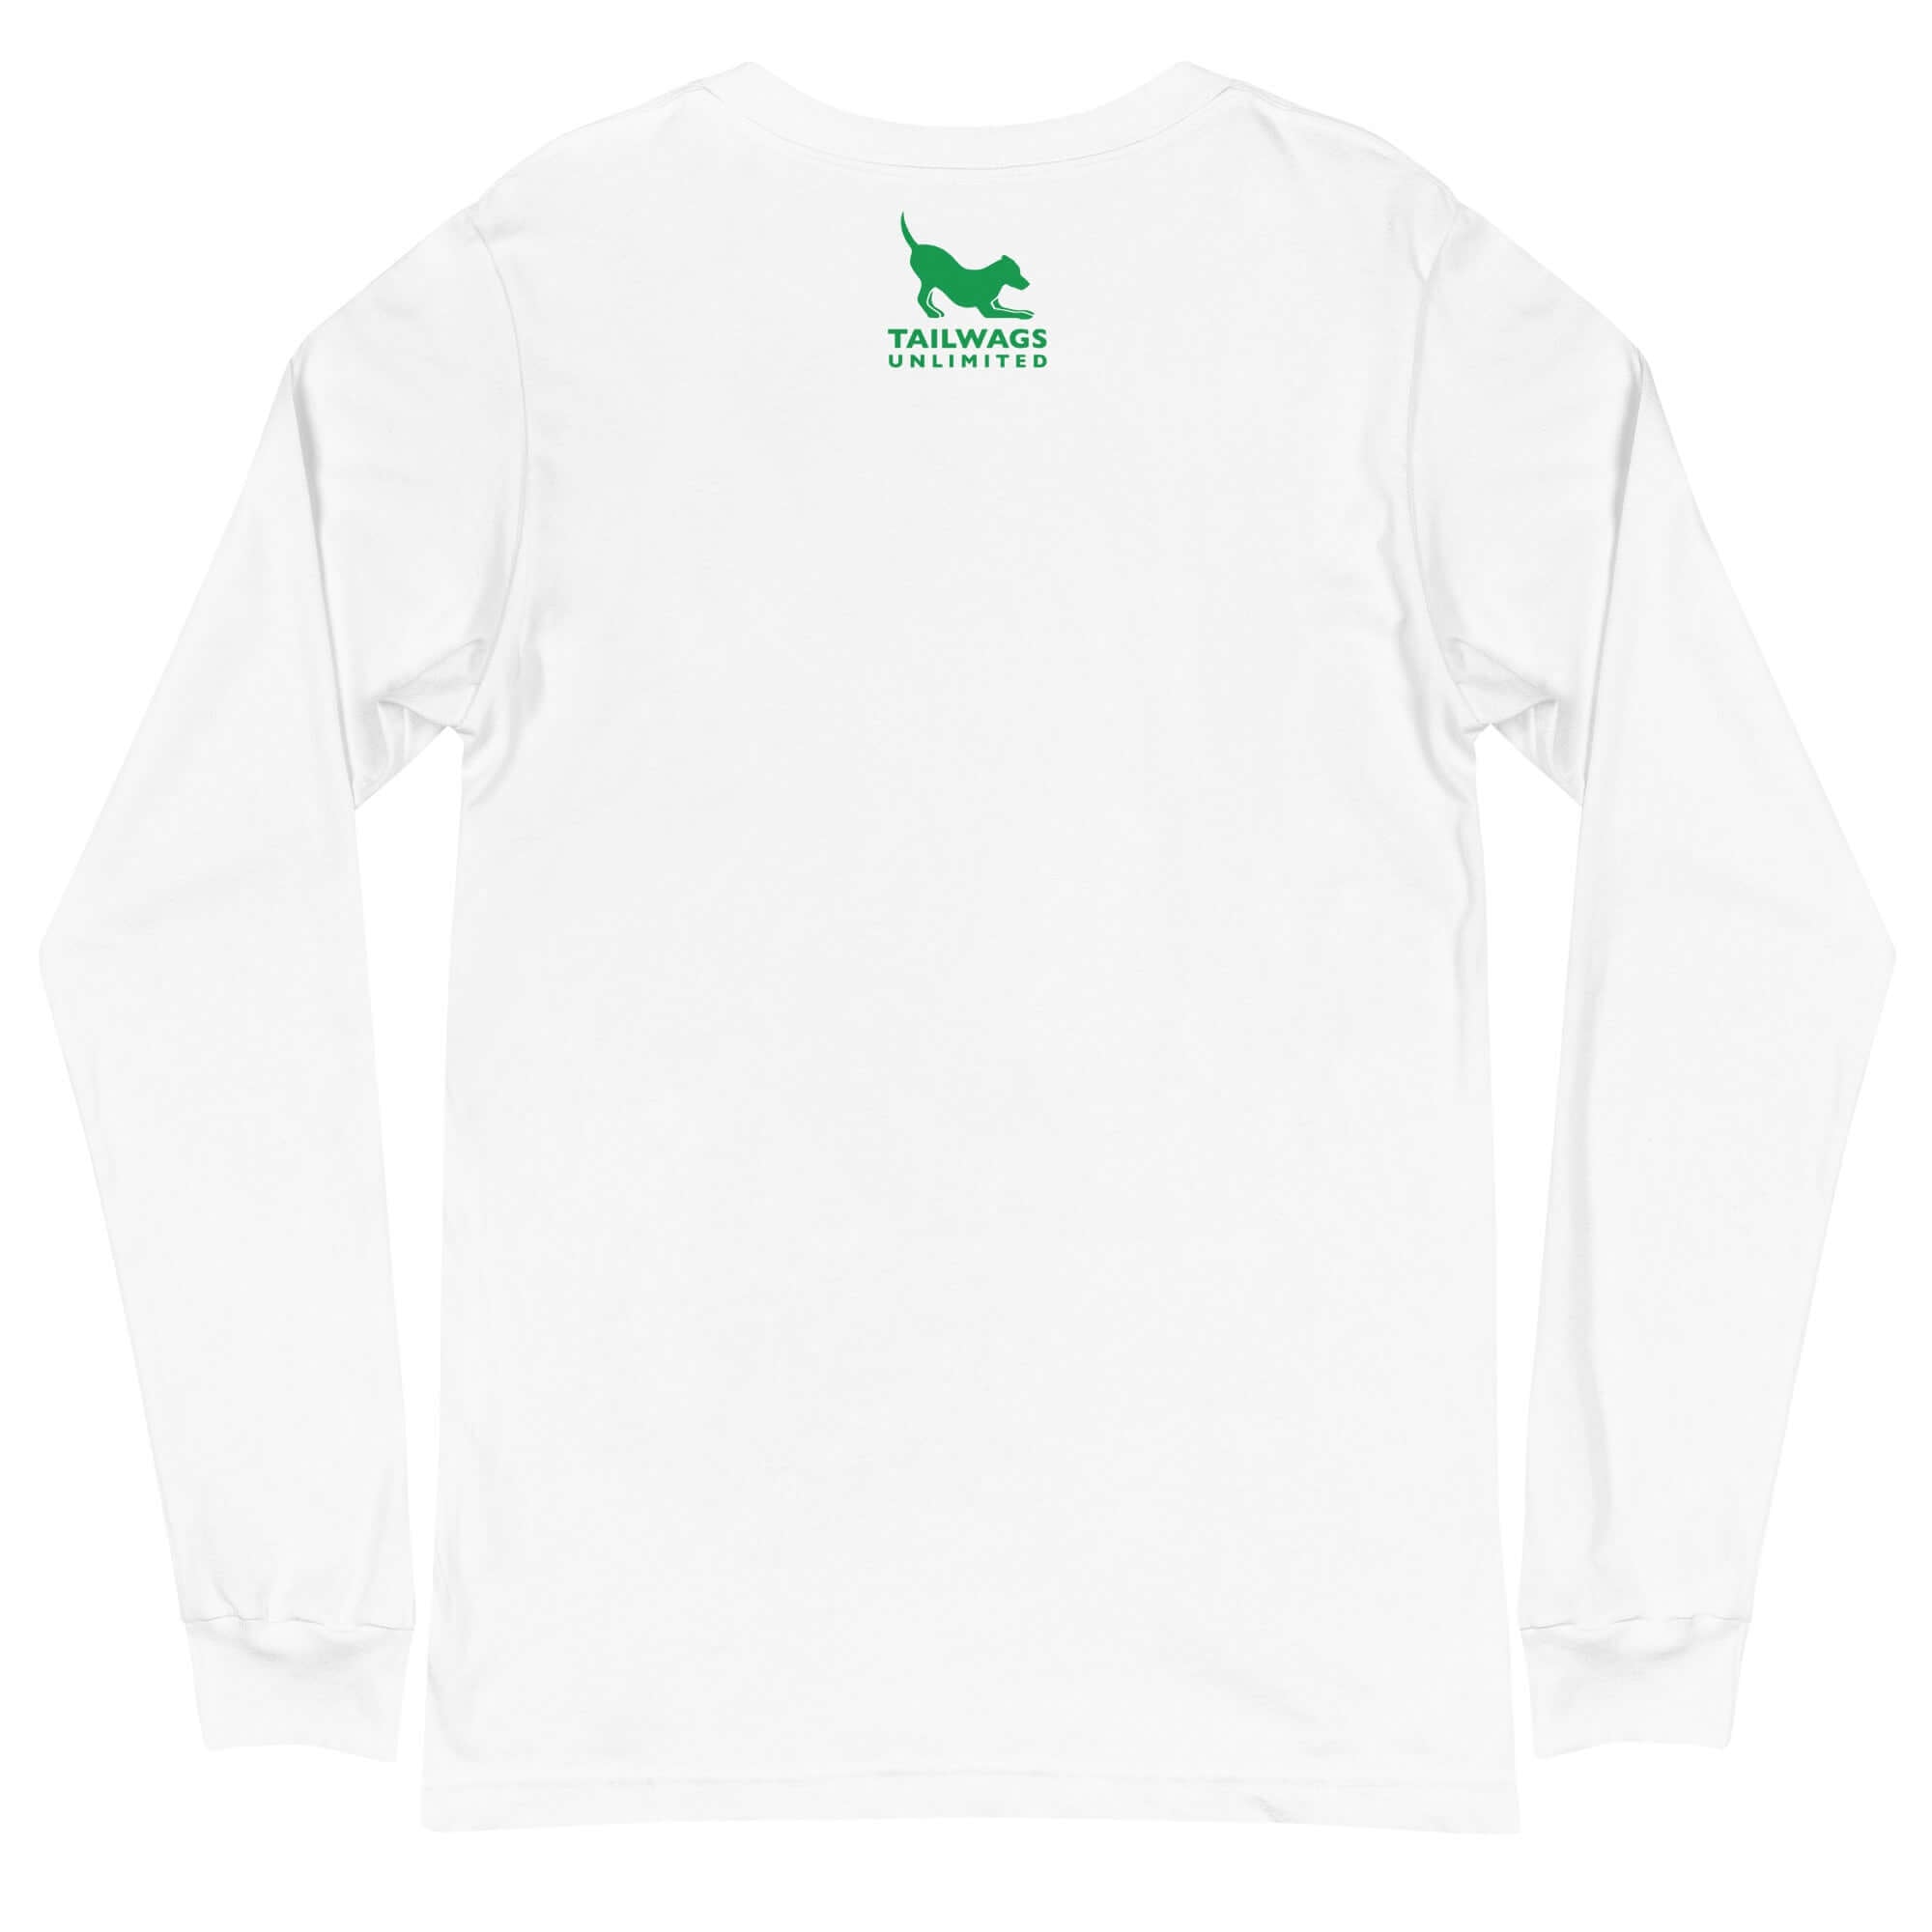 Green Four Leaf Clover Logo Long Sleeve Tee - TAILWAGS UNLIMITED